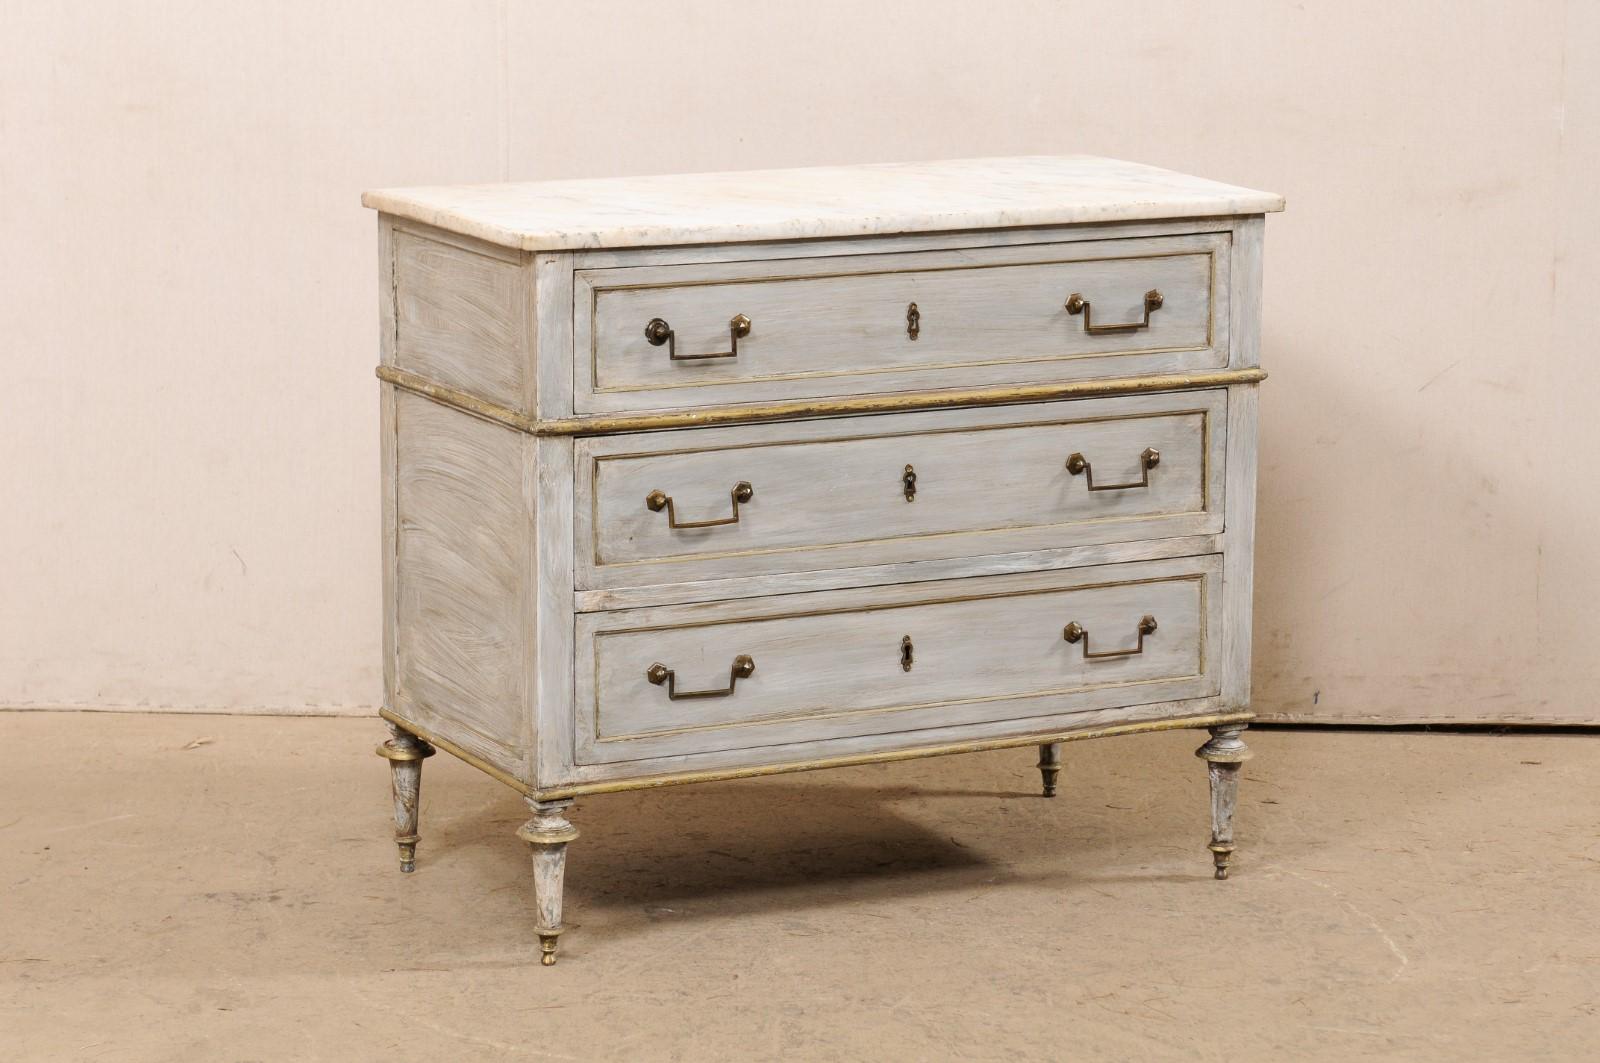 A French neoclassic painted wood chest, with its original marble top, from the early 19th century. This antique chest from France features its original white marble top, which rests atop a neoclassical case fitted with three full size, dove-tailed,